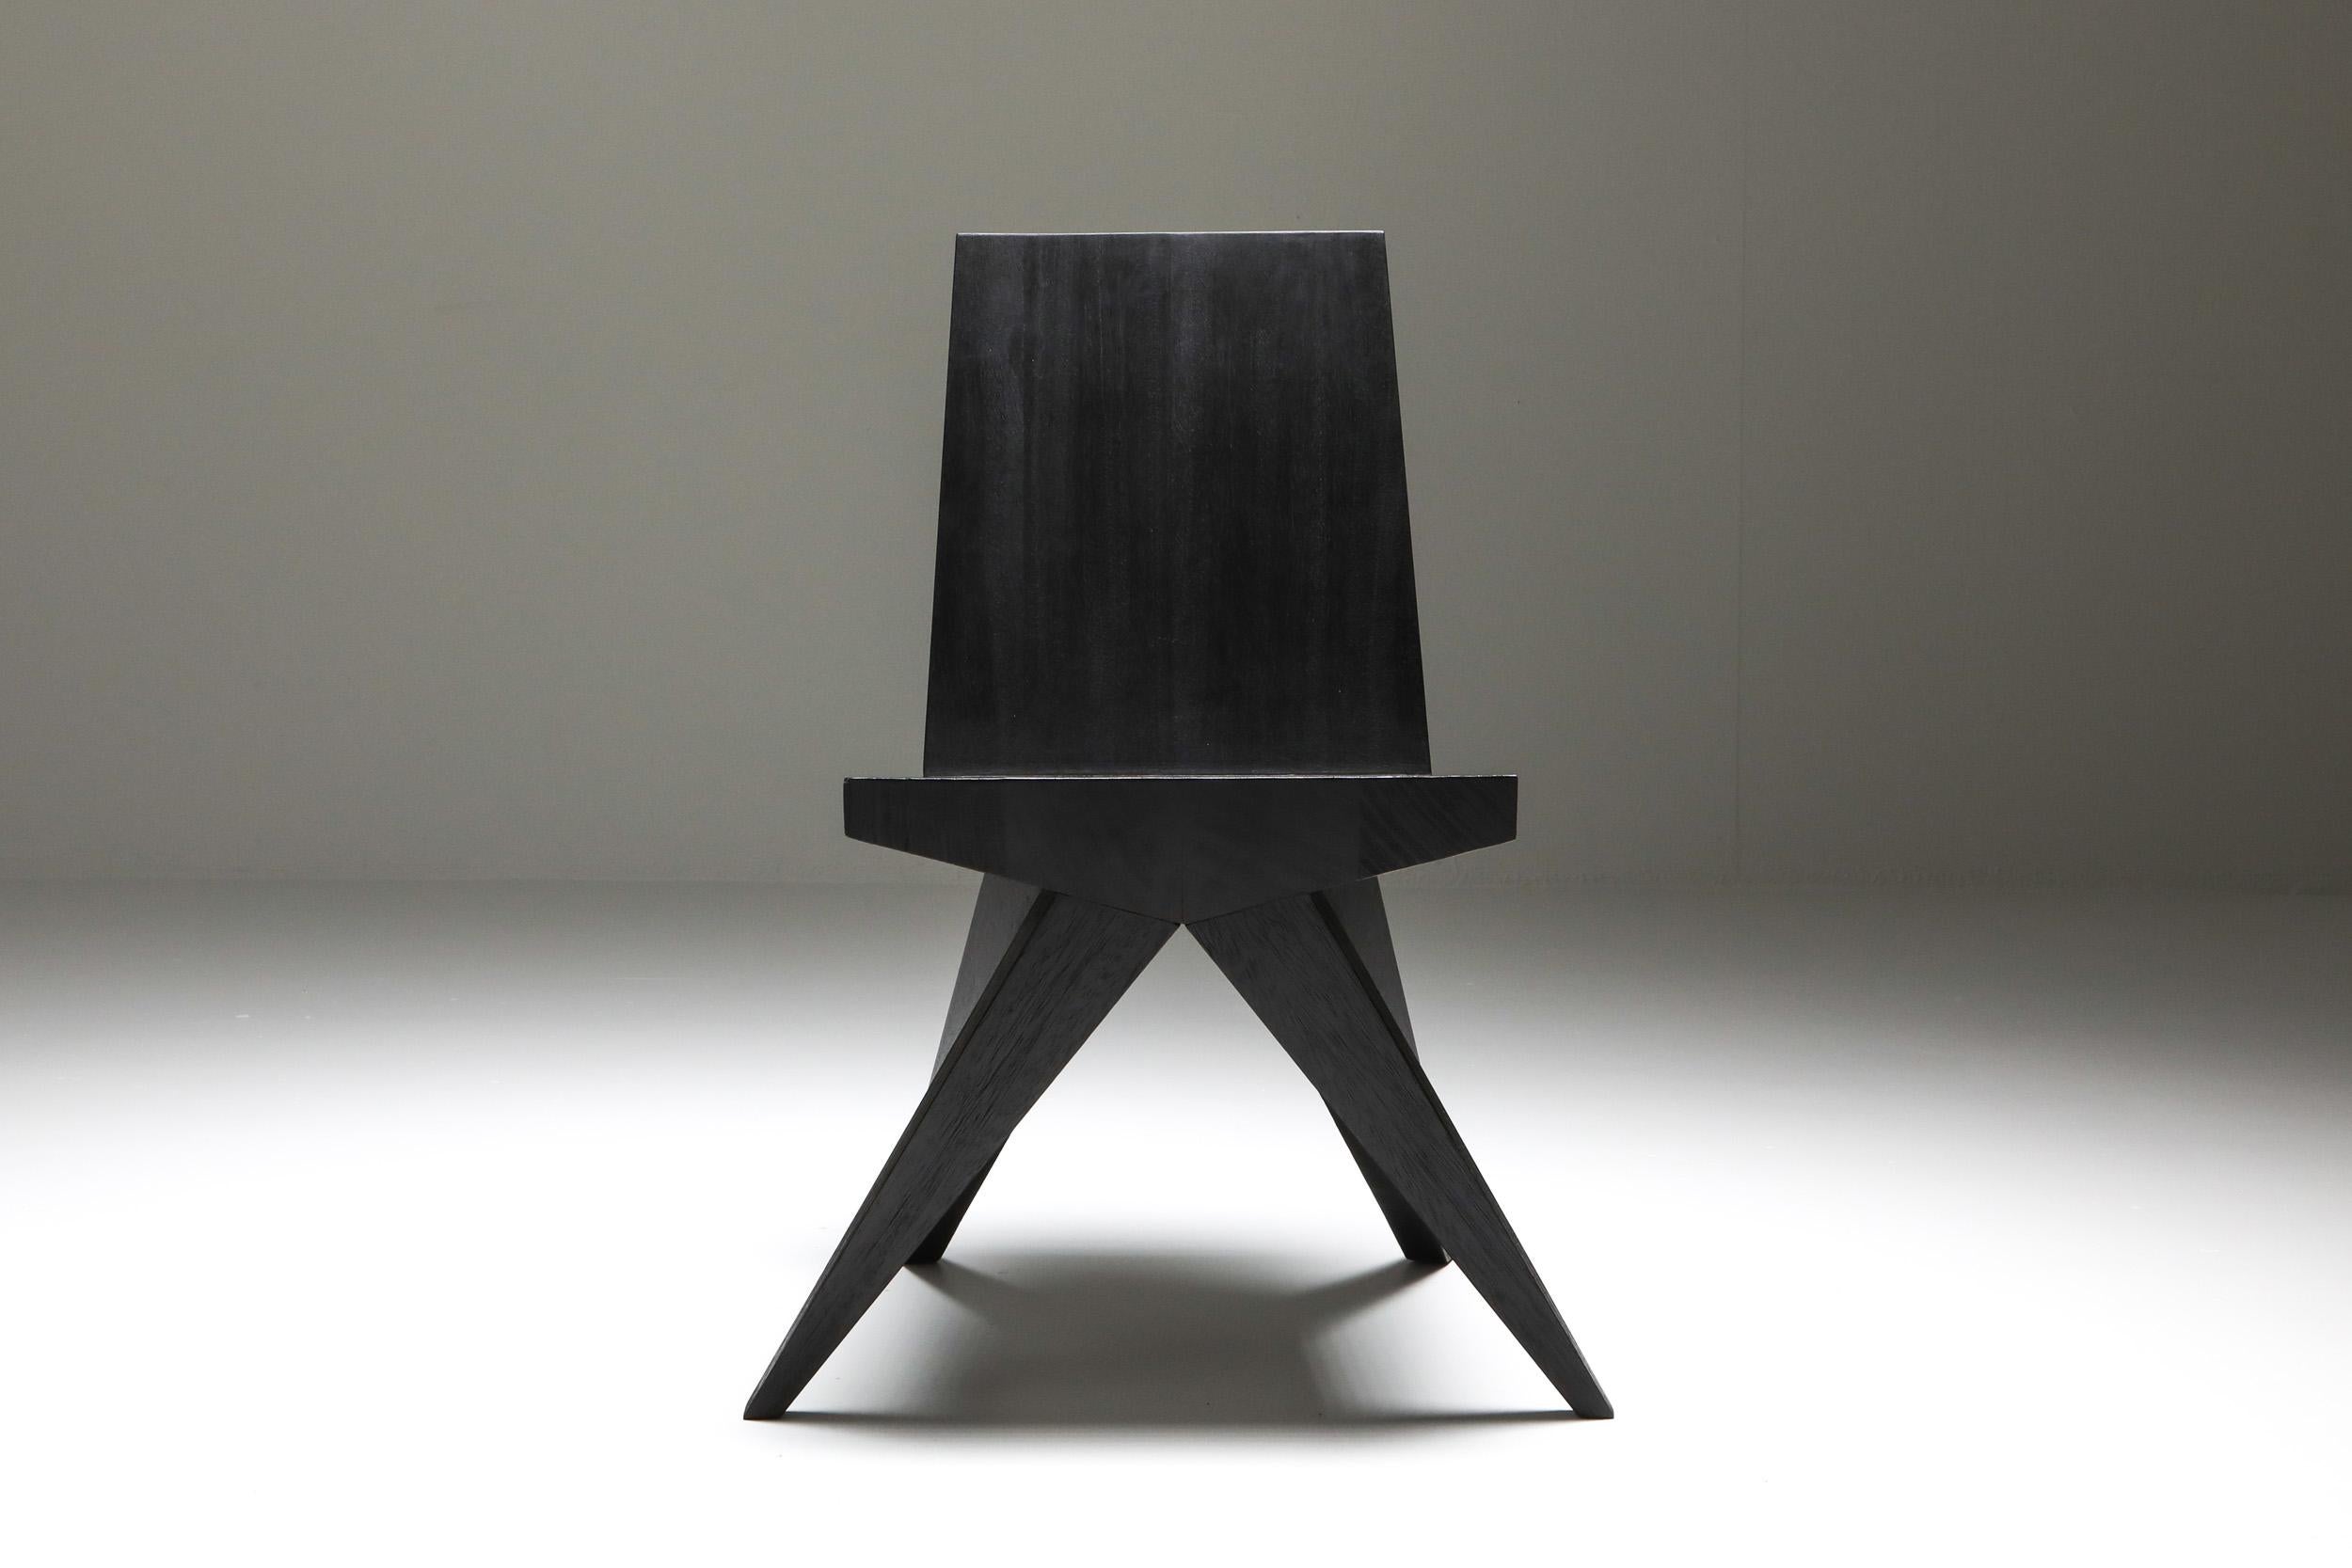 V-dining chair
Burnished and waxed Iroko wood. 

Black furniture, burnt
Fits well in an African modernist or Rick Owens inspired decor

Measures: 46 cm wide x 57 cm long x 81 cm high / 18” wide x 22.5” long x 32” high
Seat. 45cm high x 45 cm